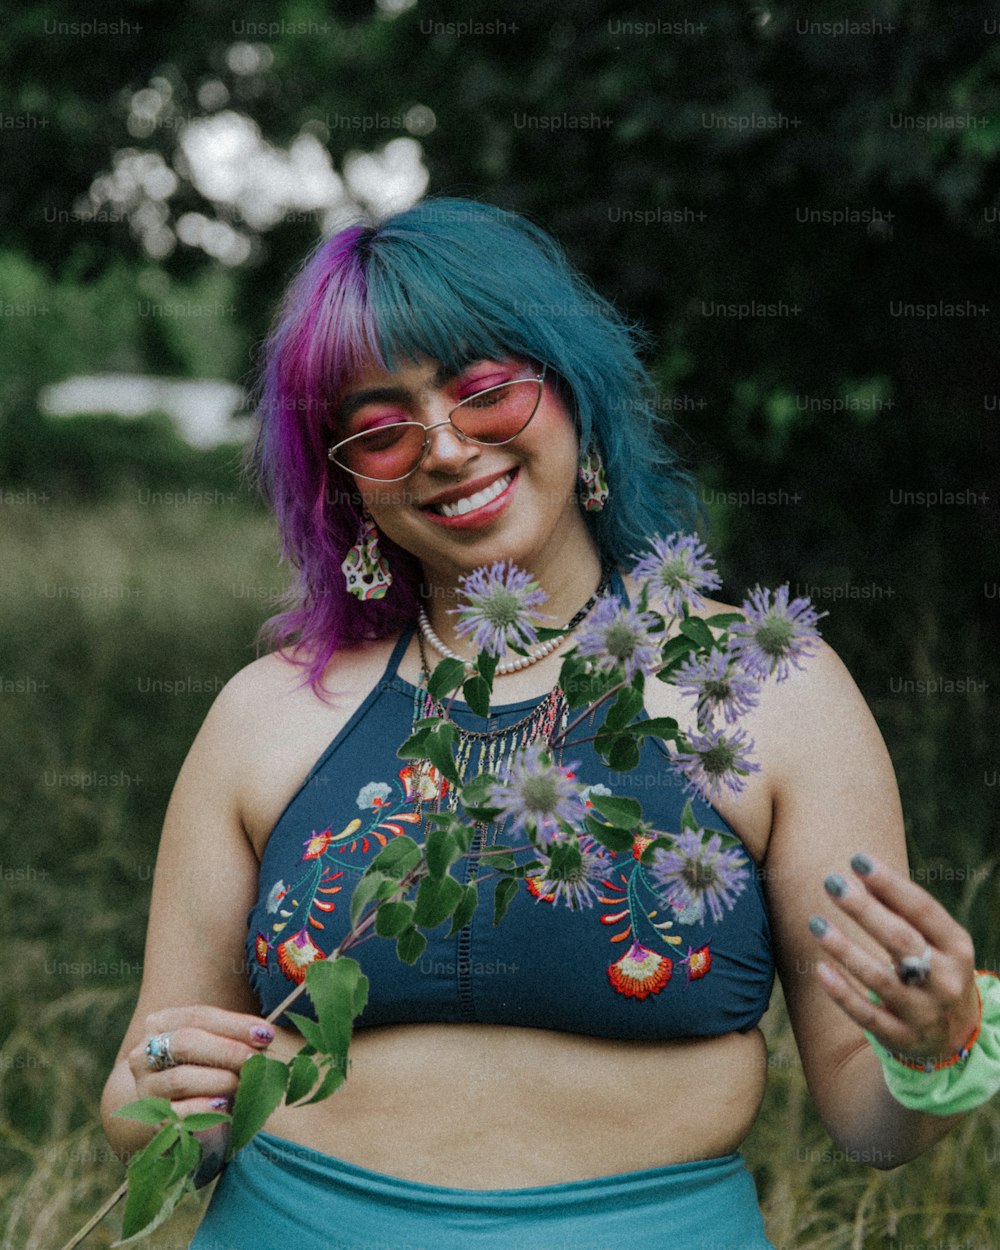 a woman with purple hair wearing a blue crop top